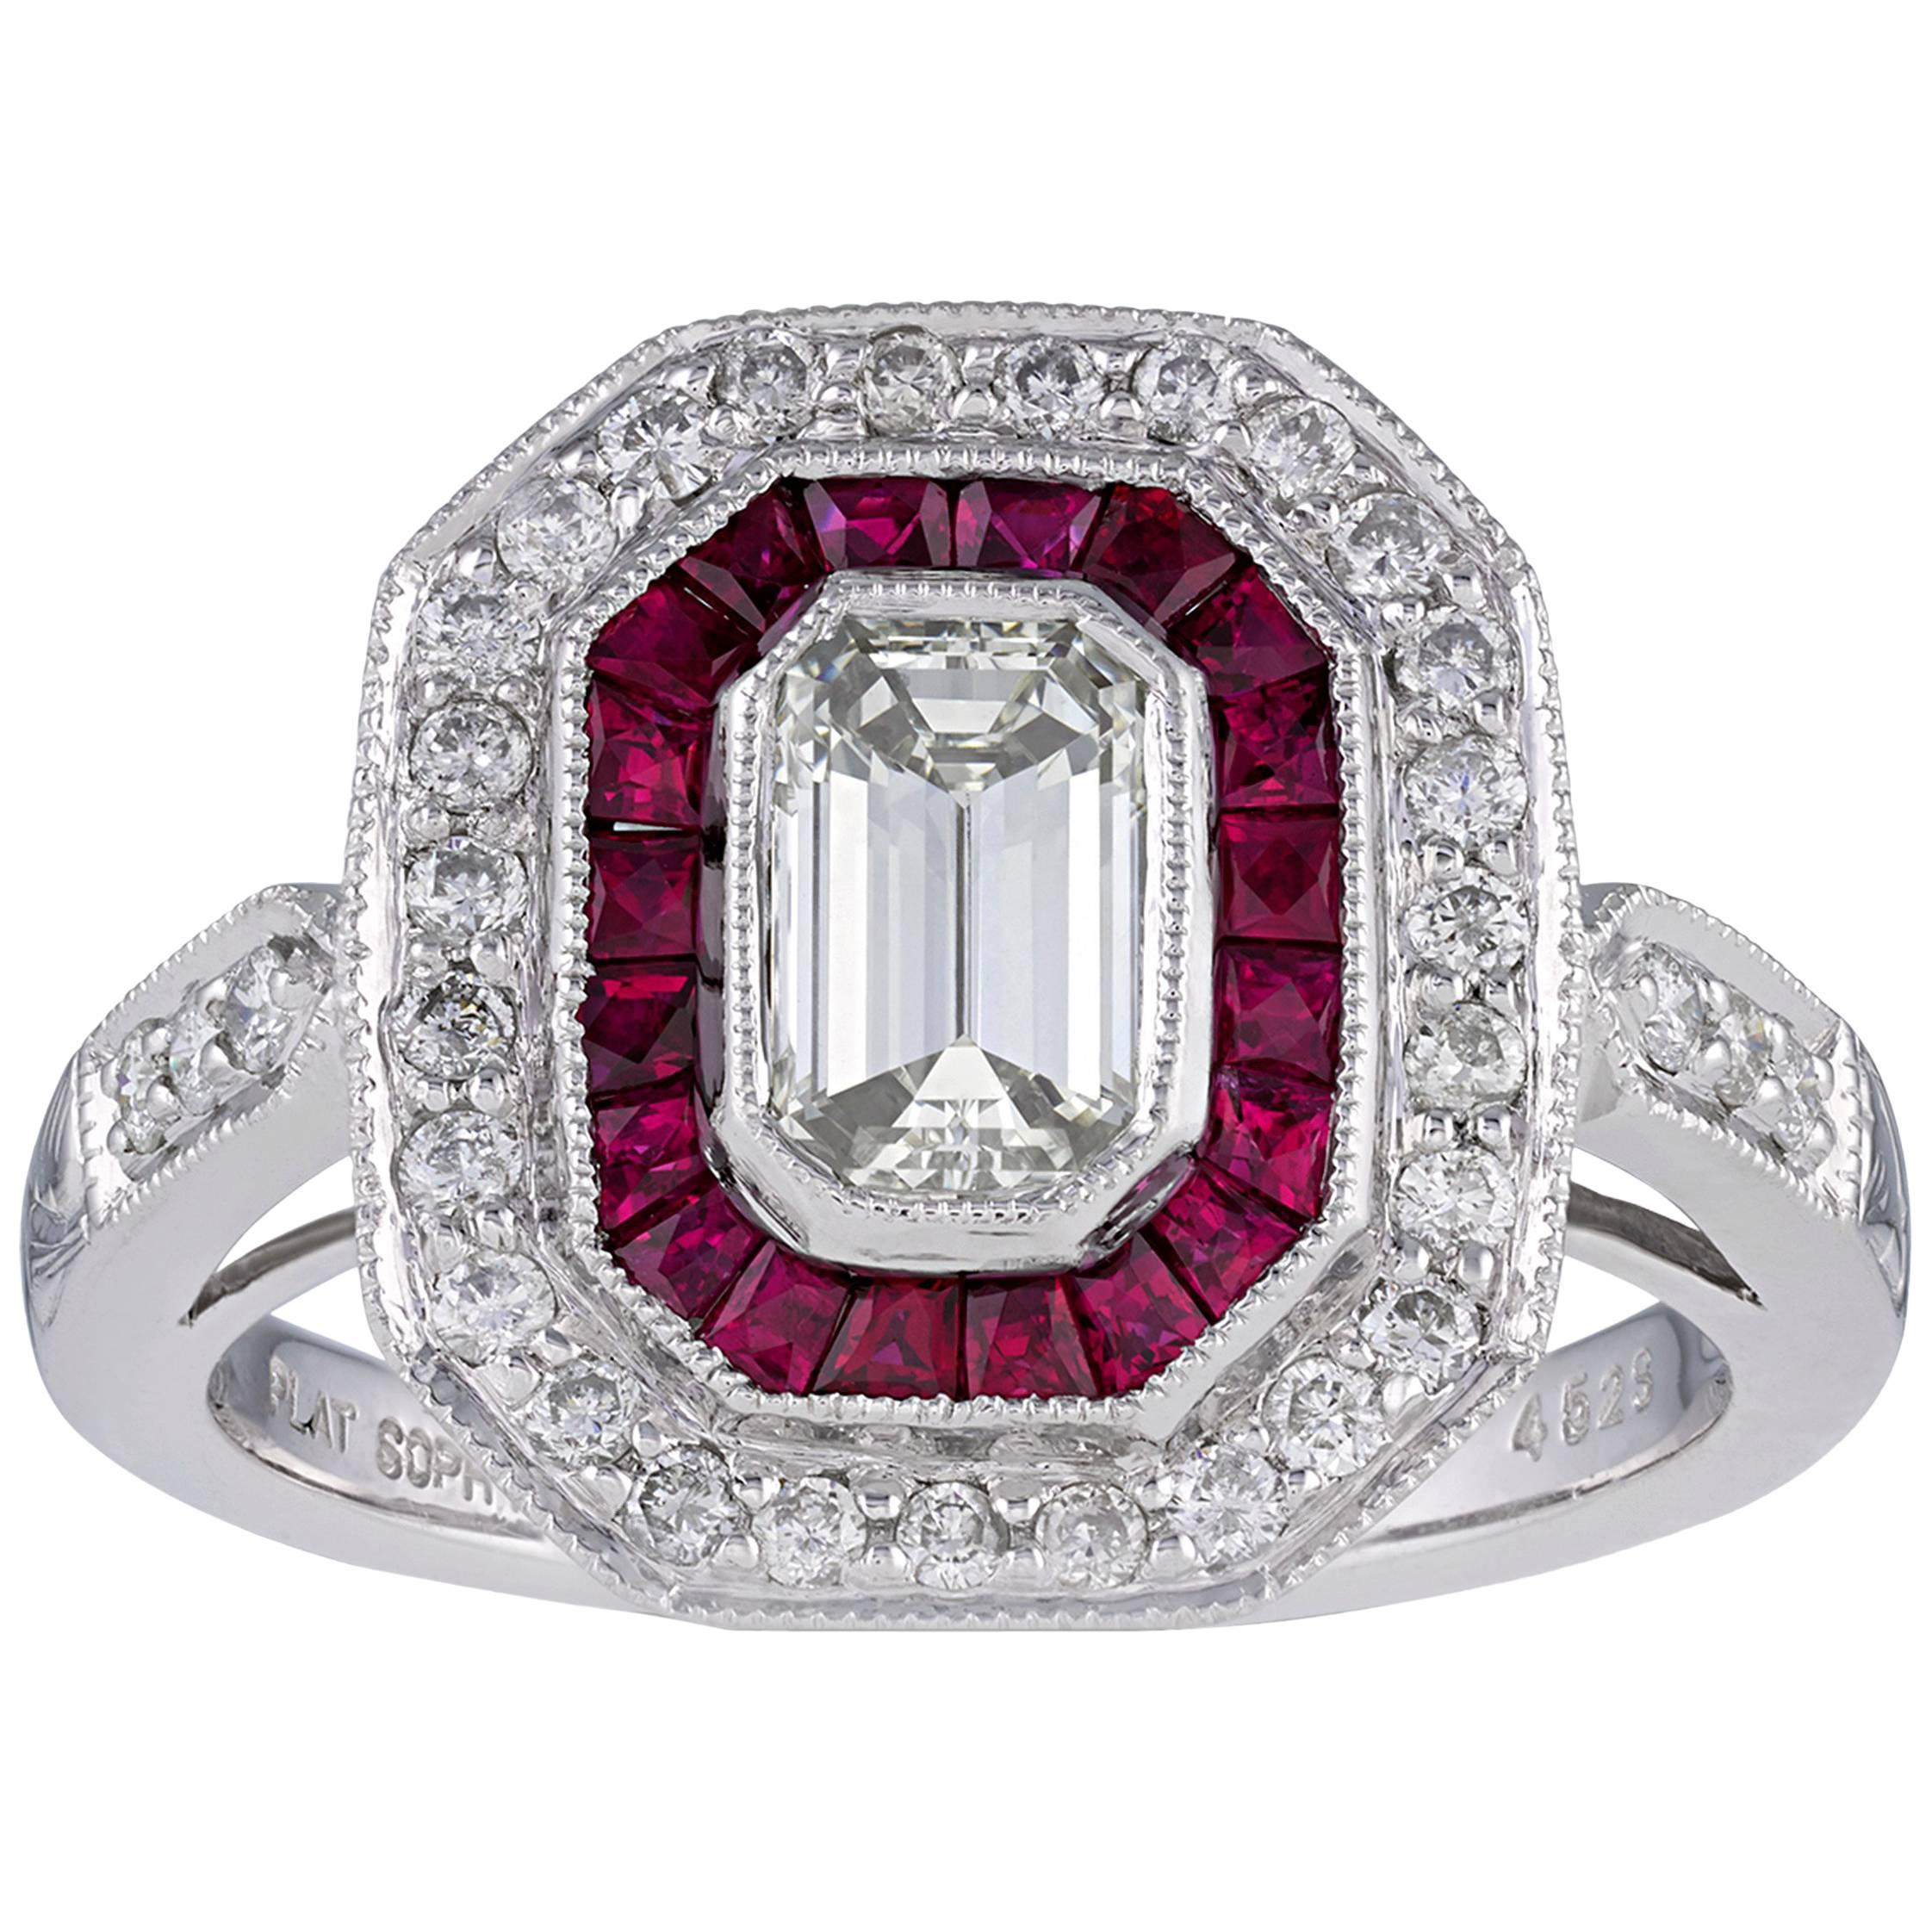 Art Deco-Style Diamond and Ruby Ring